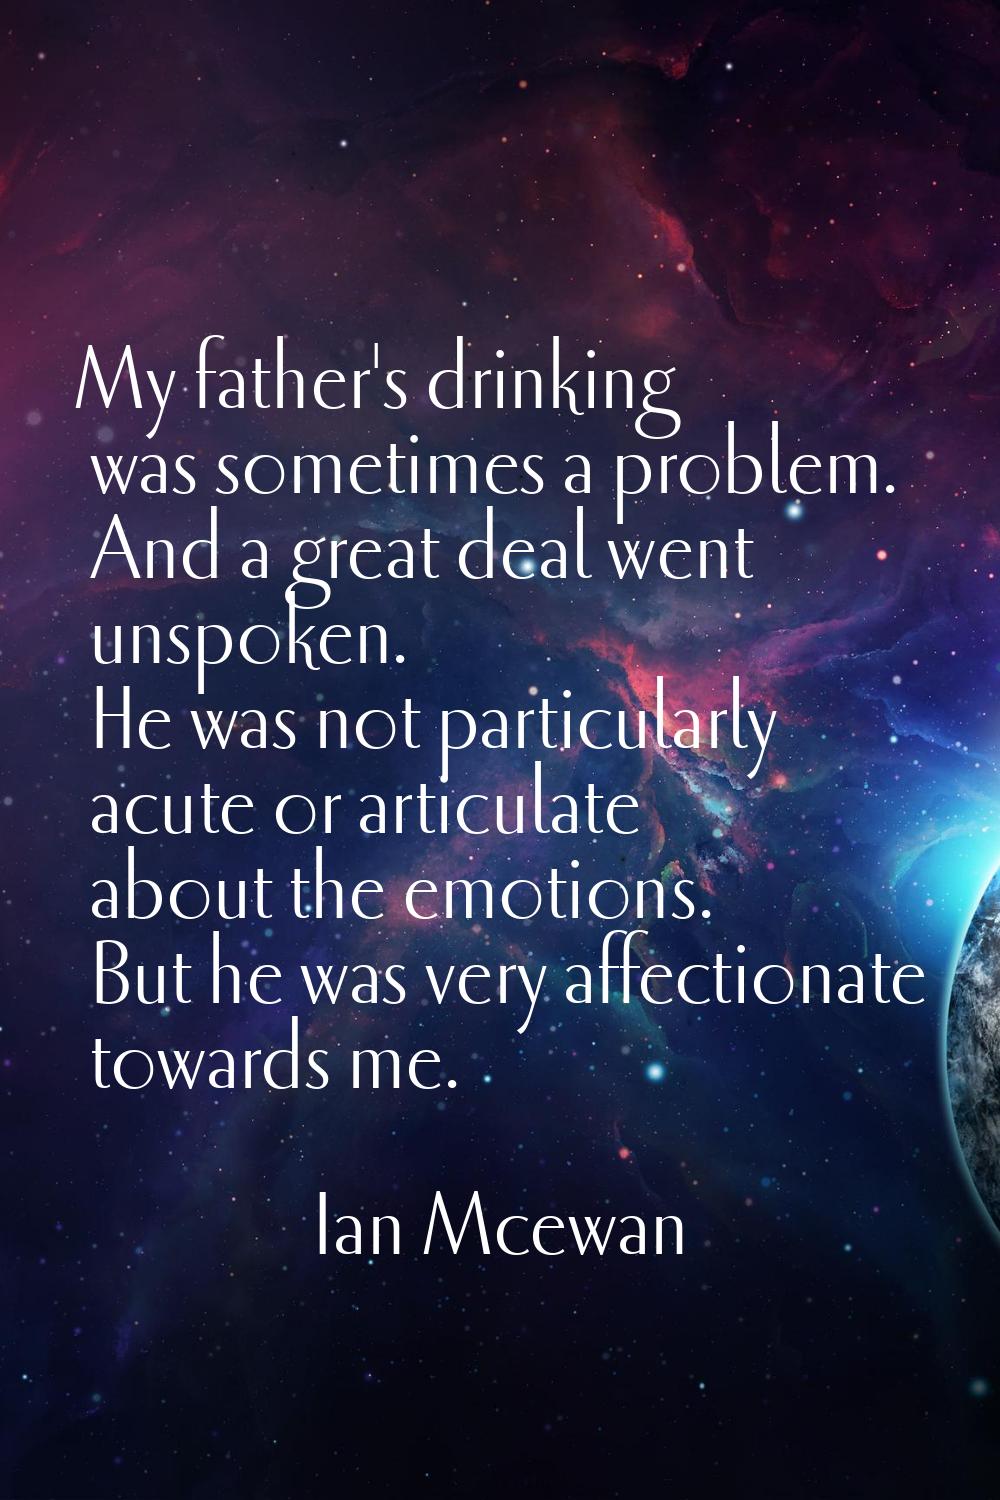 My father's drinking was sometimes a problem. And a great deal went unspoken. He was not particular